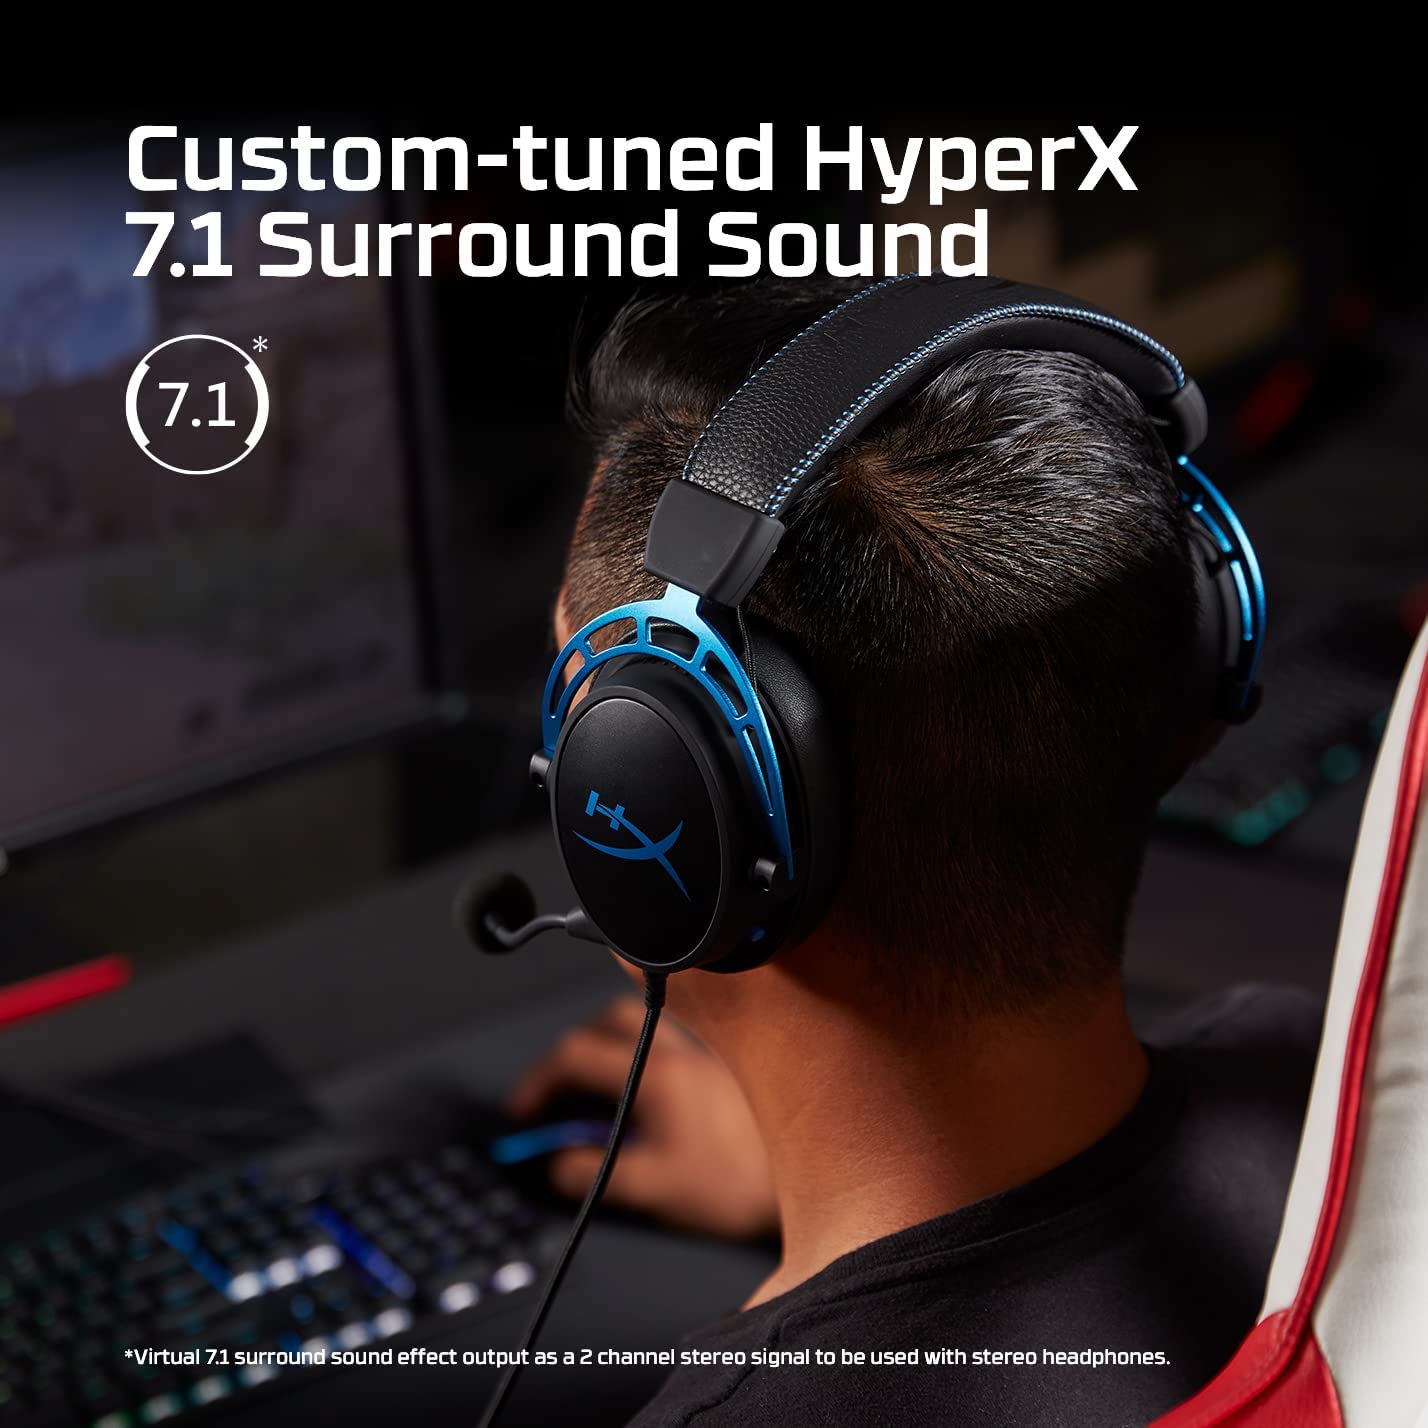 HyperX Cloud Alpha S - PC Gaming Headset, 7.1 Surround Sound, Adjustable Bass, Dual Chamber Drivers, Chat Mixer, Breathable Leatherette, Memory Foam, and Noise Cancelling Microphone - Blue